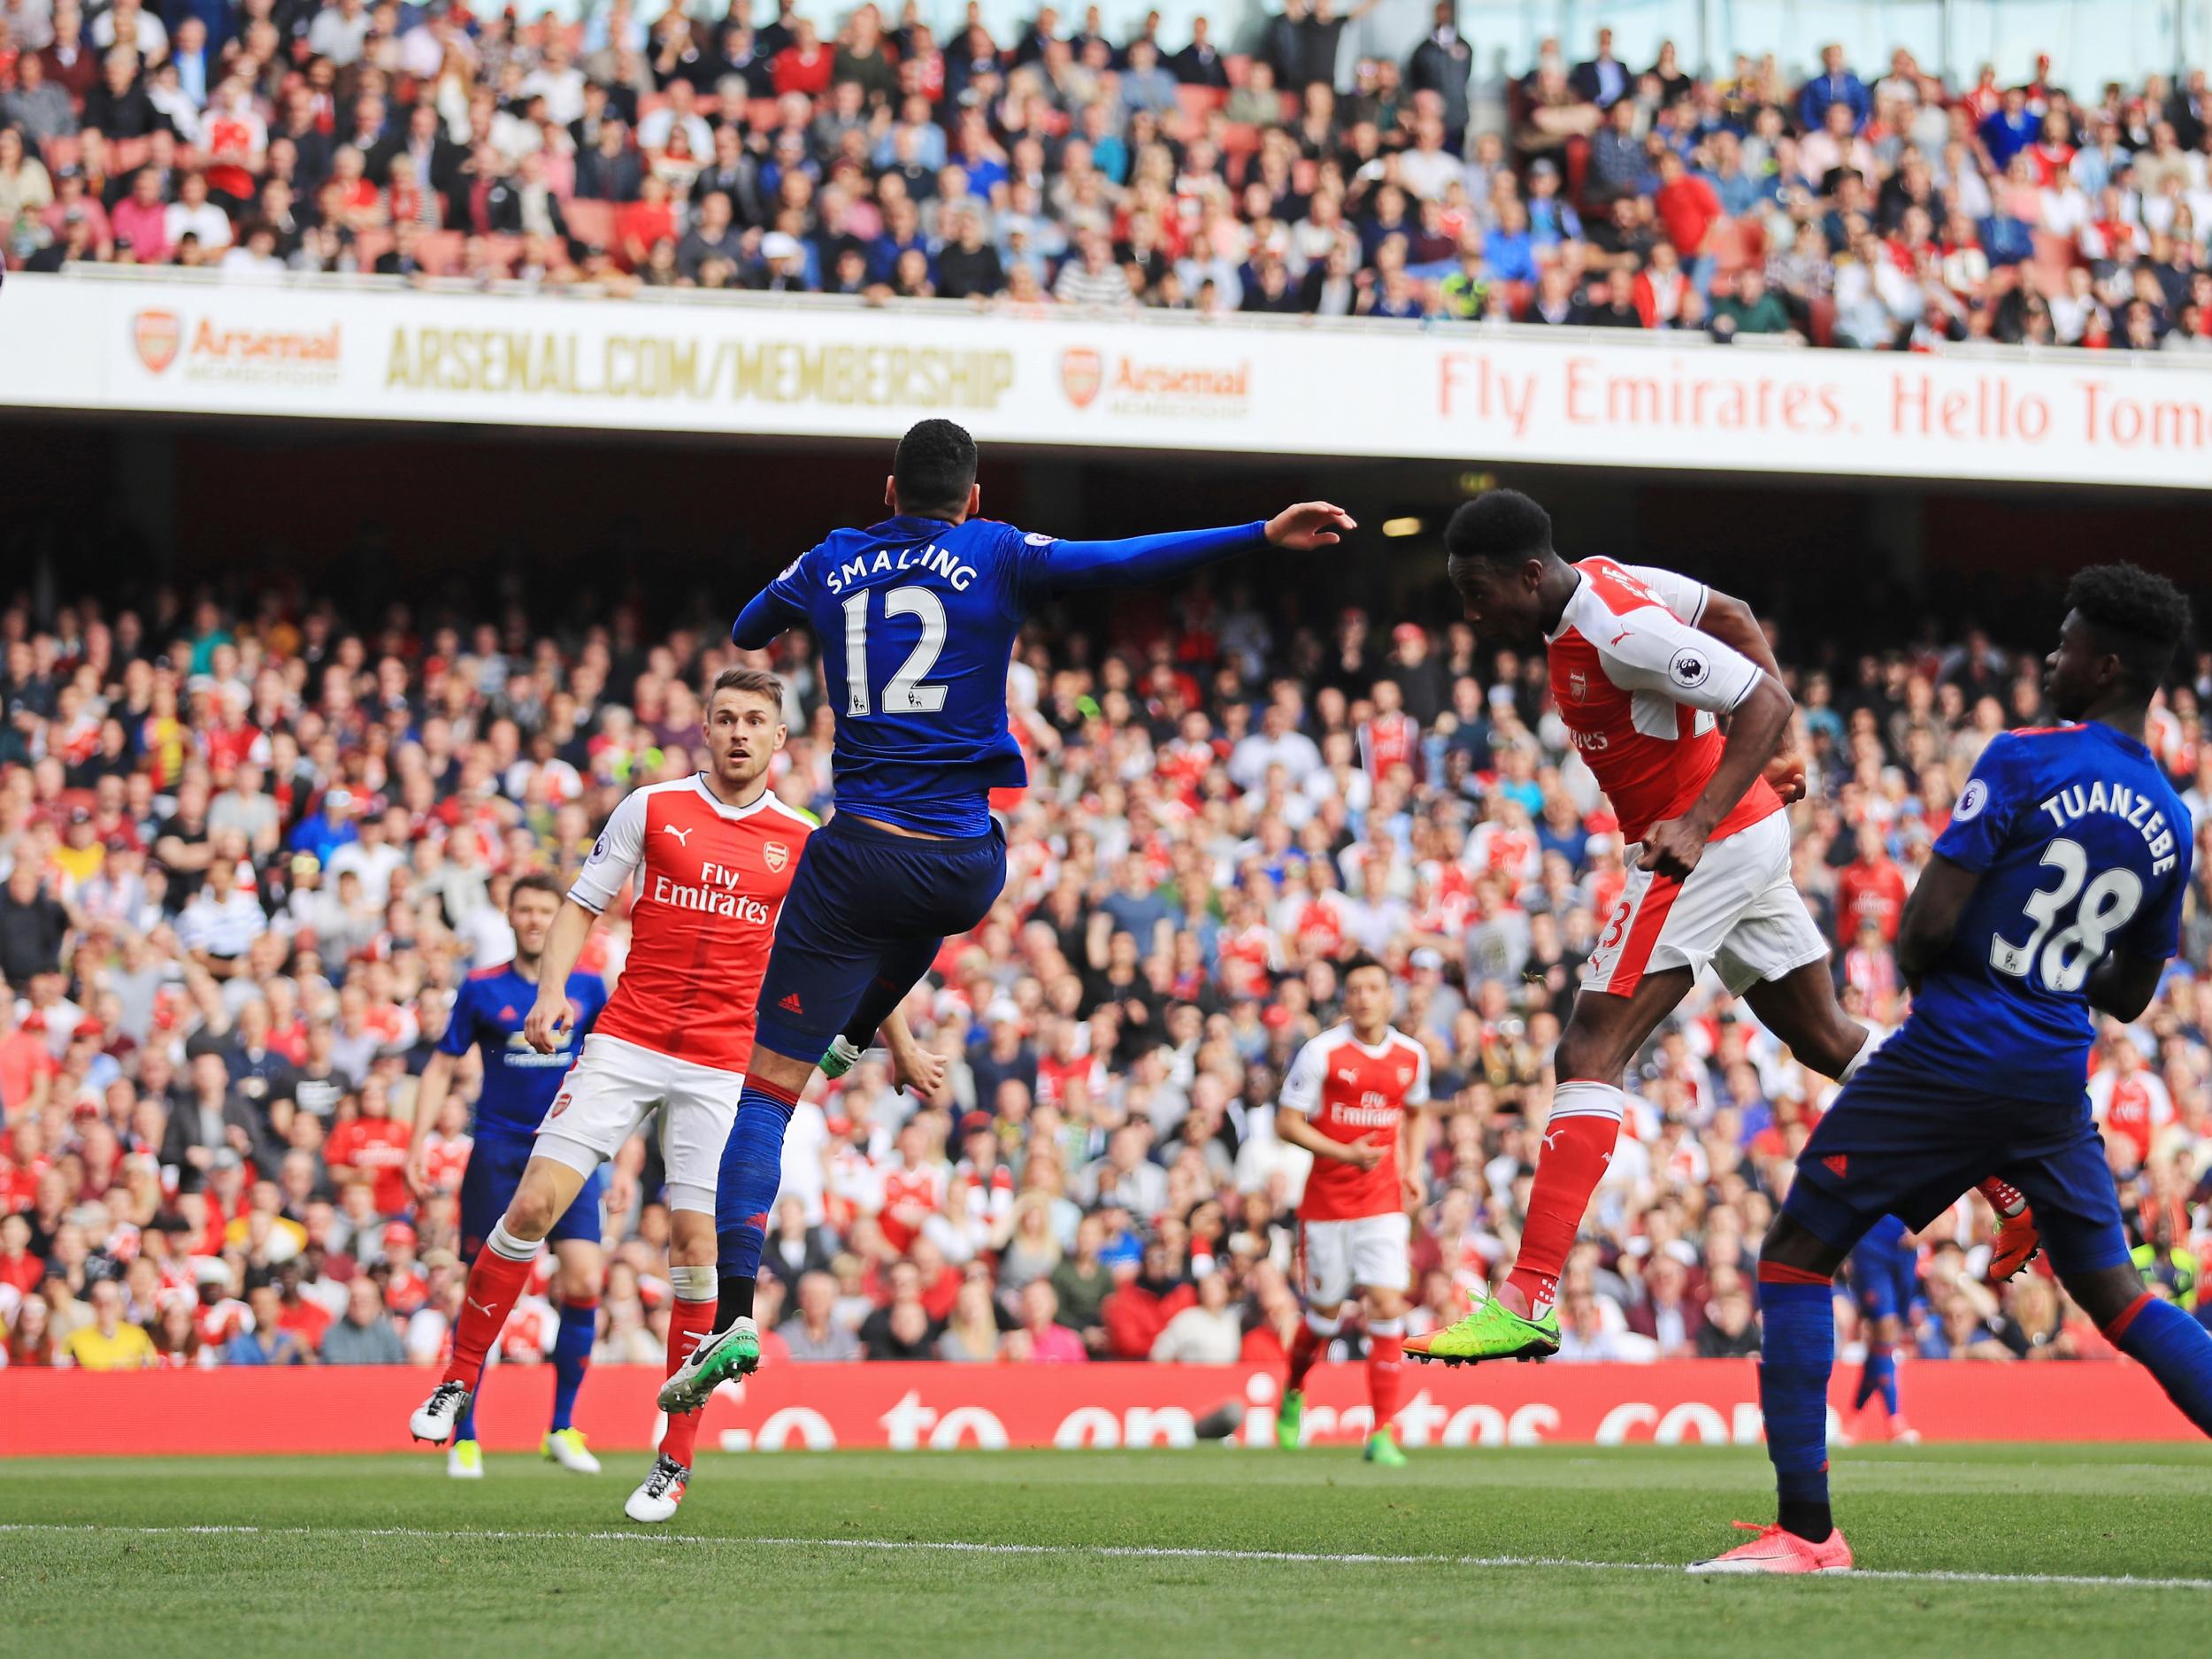 Welbeck scored his third goal in four games against United (Getty)